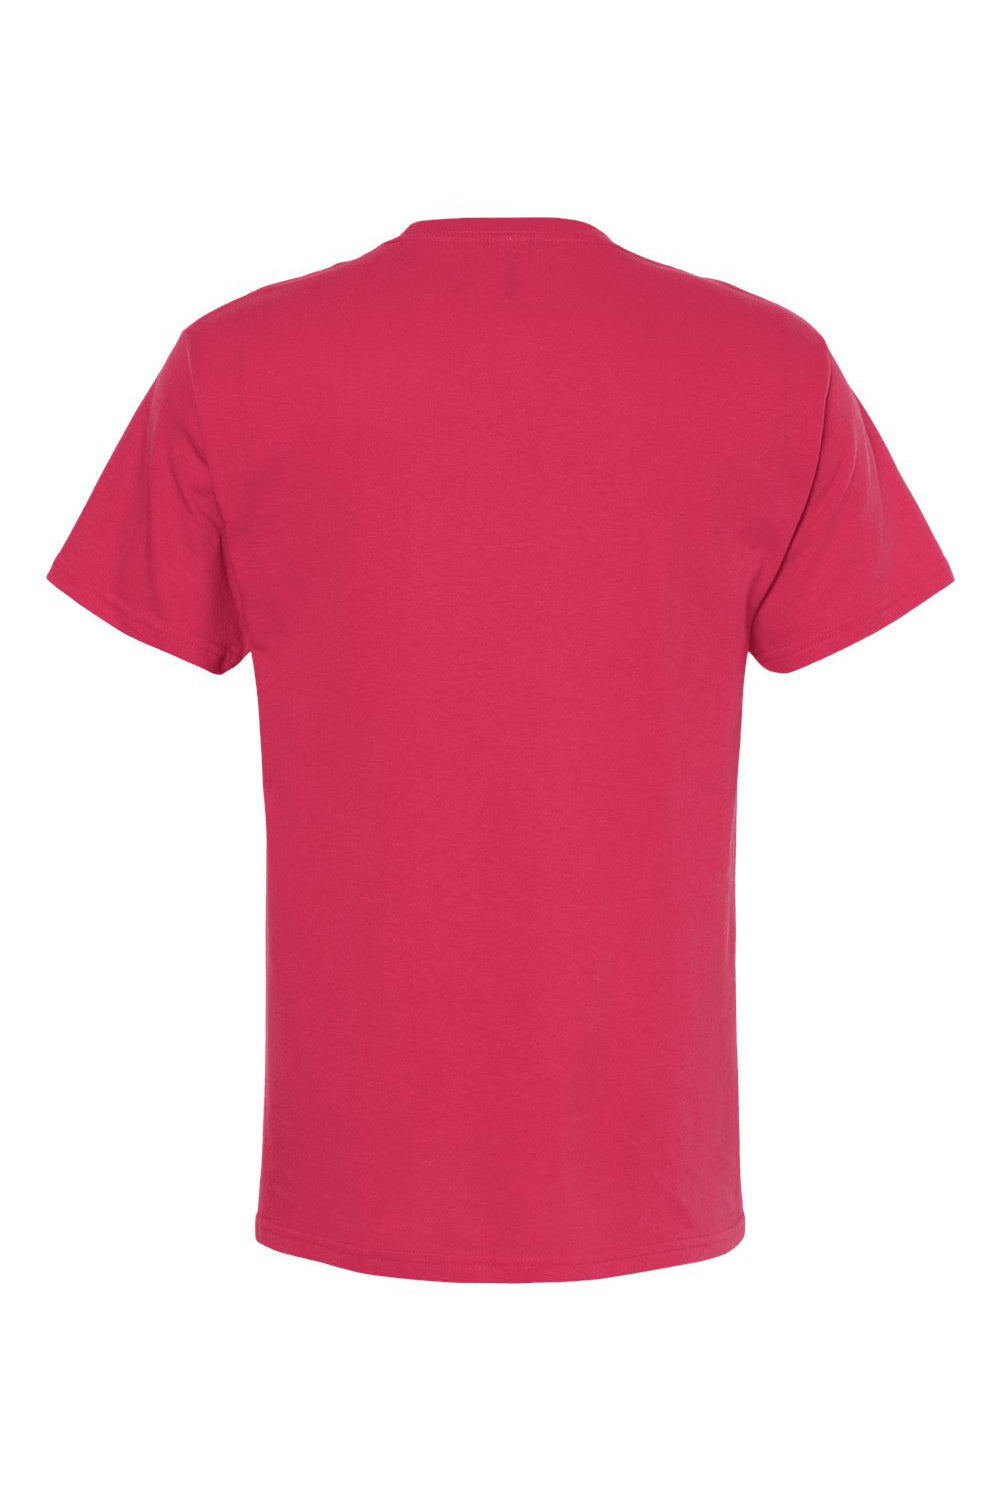 M&O 4800 Mens Gold Soft Touch Short Sleeve Crewneck T-Shirt Heliconia Pink Flat Back